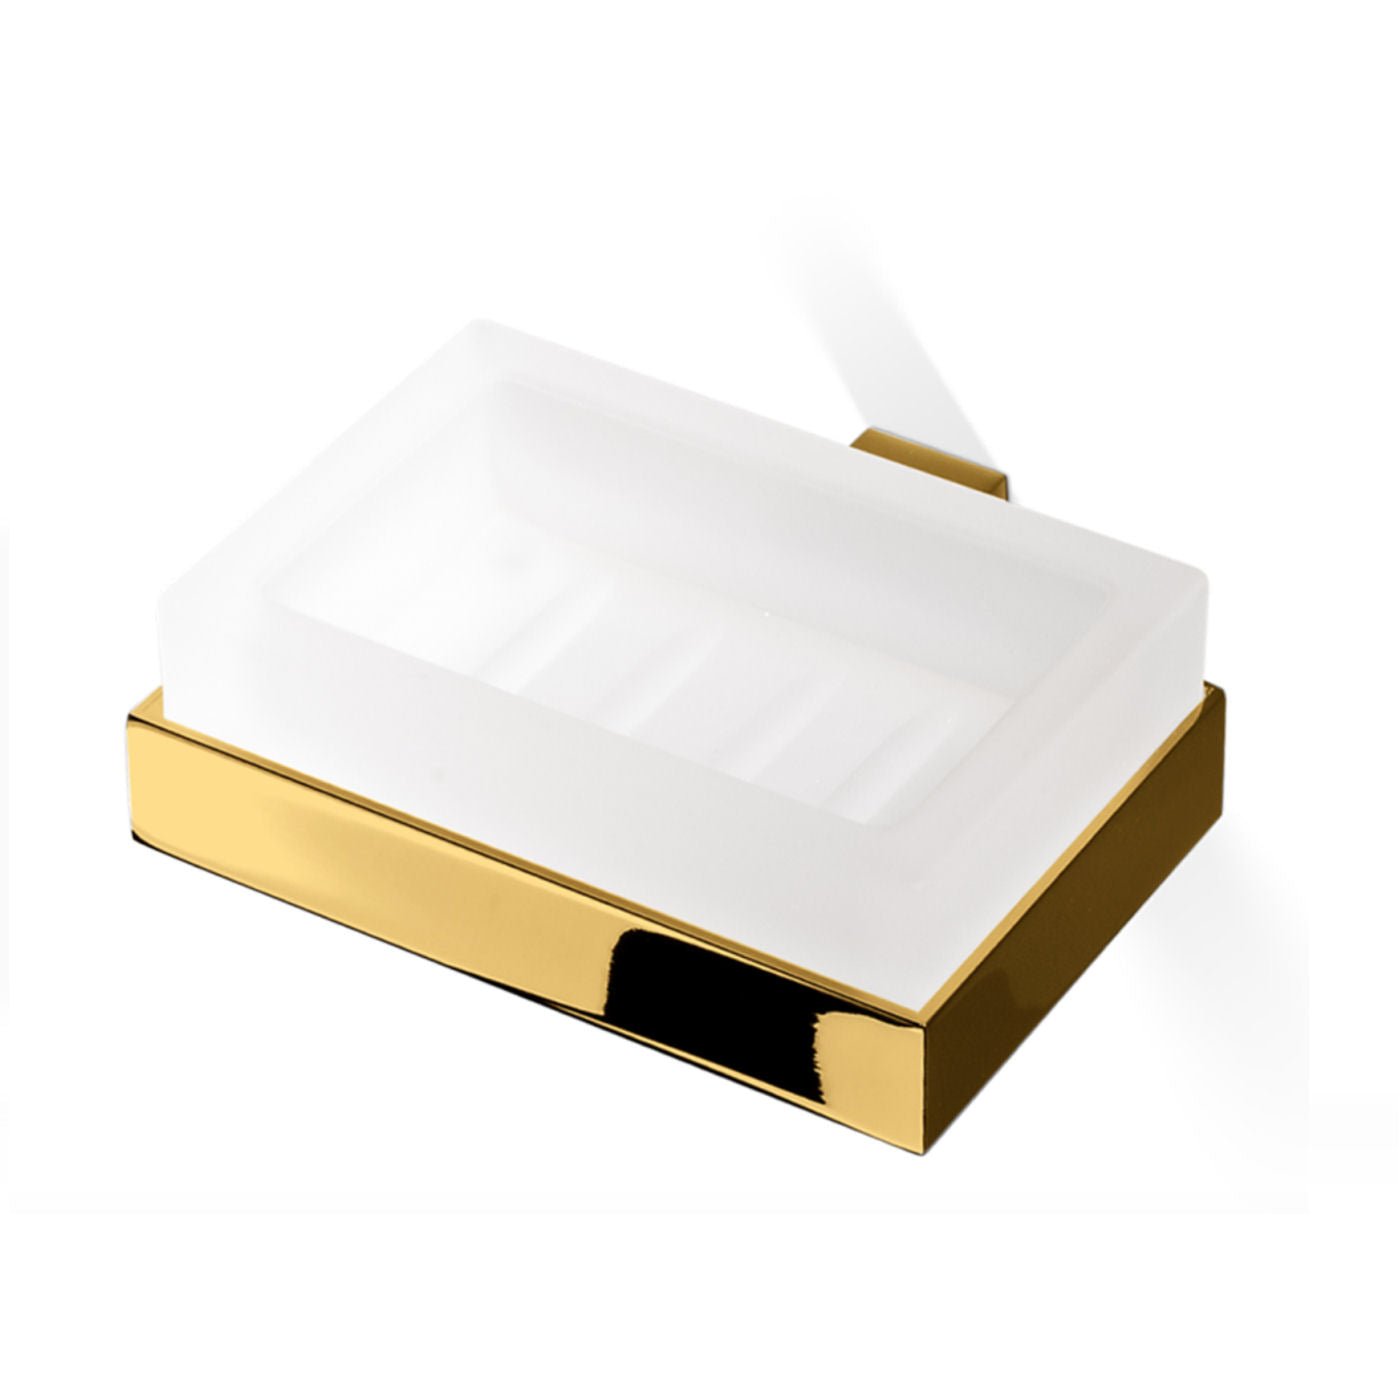 Luxury Shiny Gold Wall-Mounted Soap Dish by Decor Walther - |VESIMI Design| Luxury Bathrooms and Home Decor